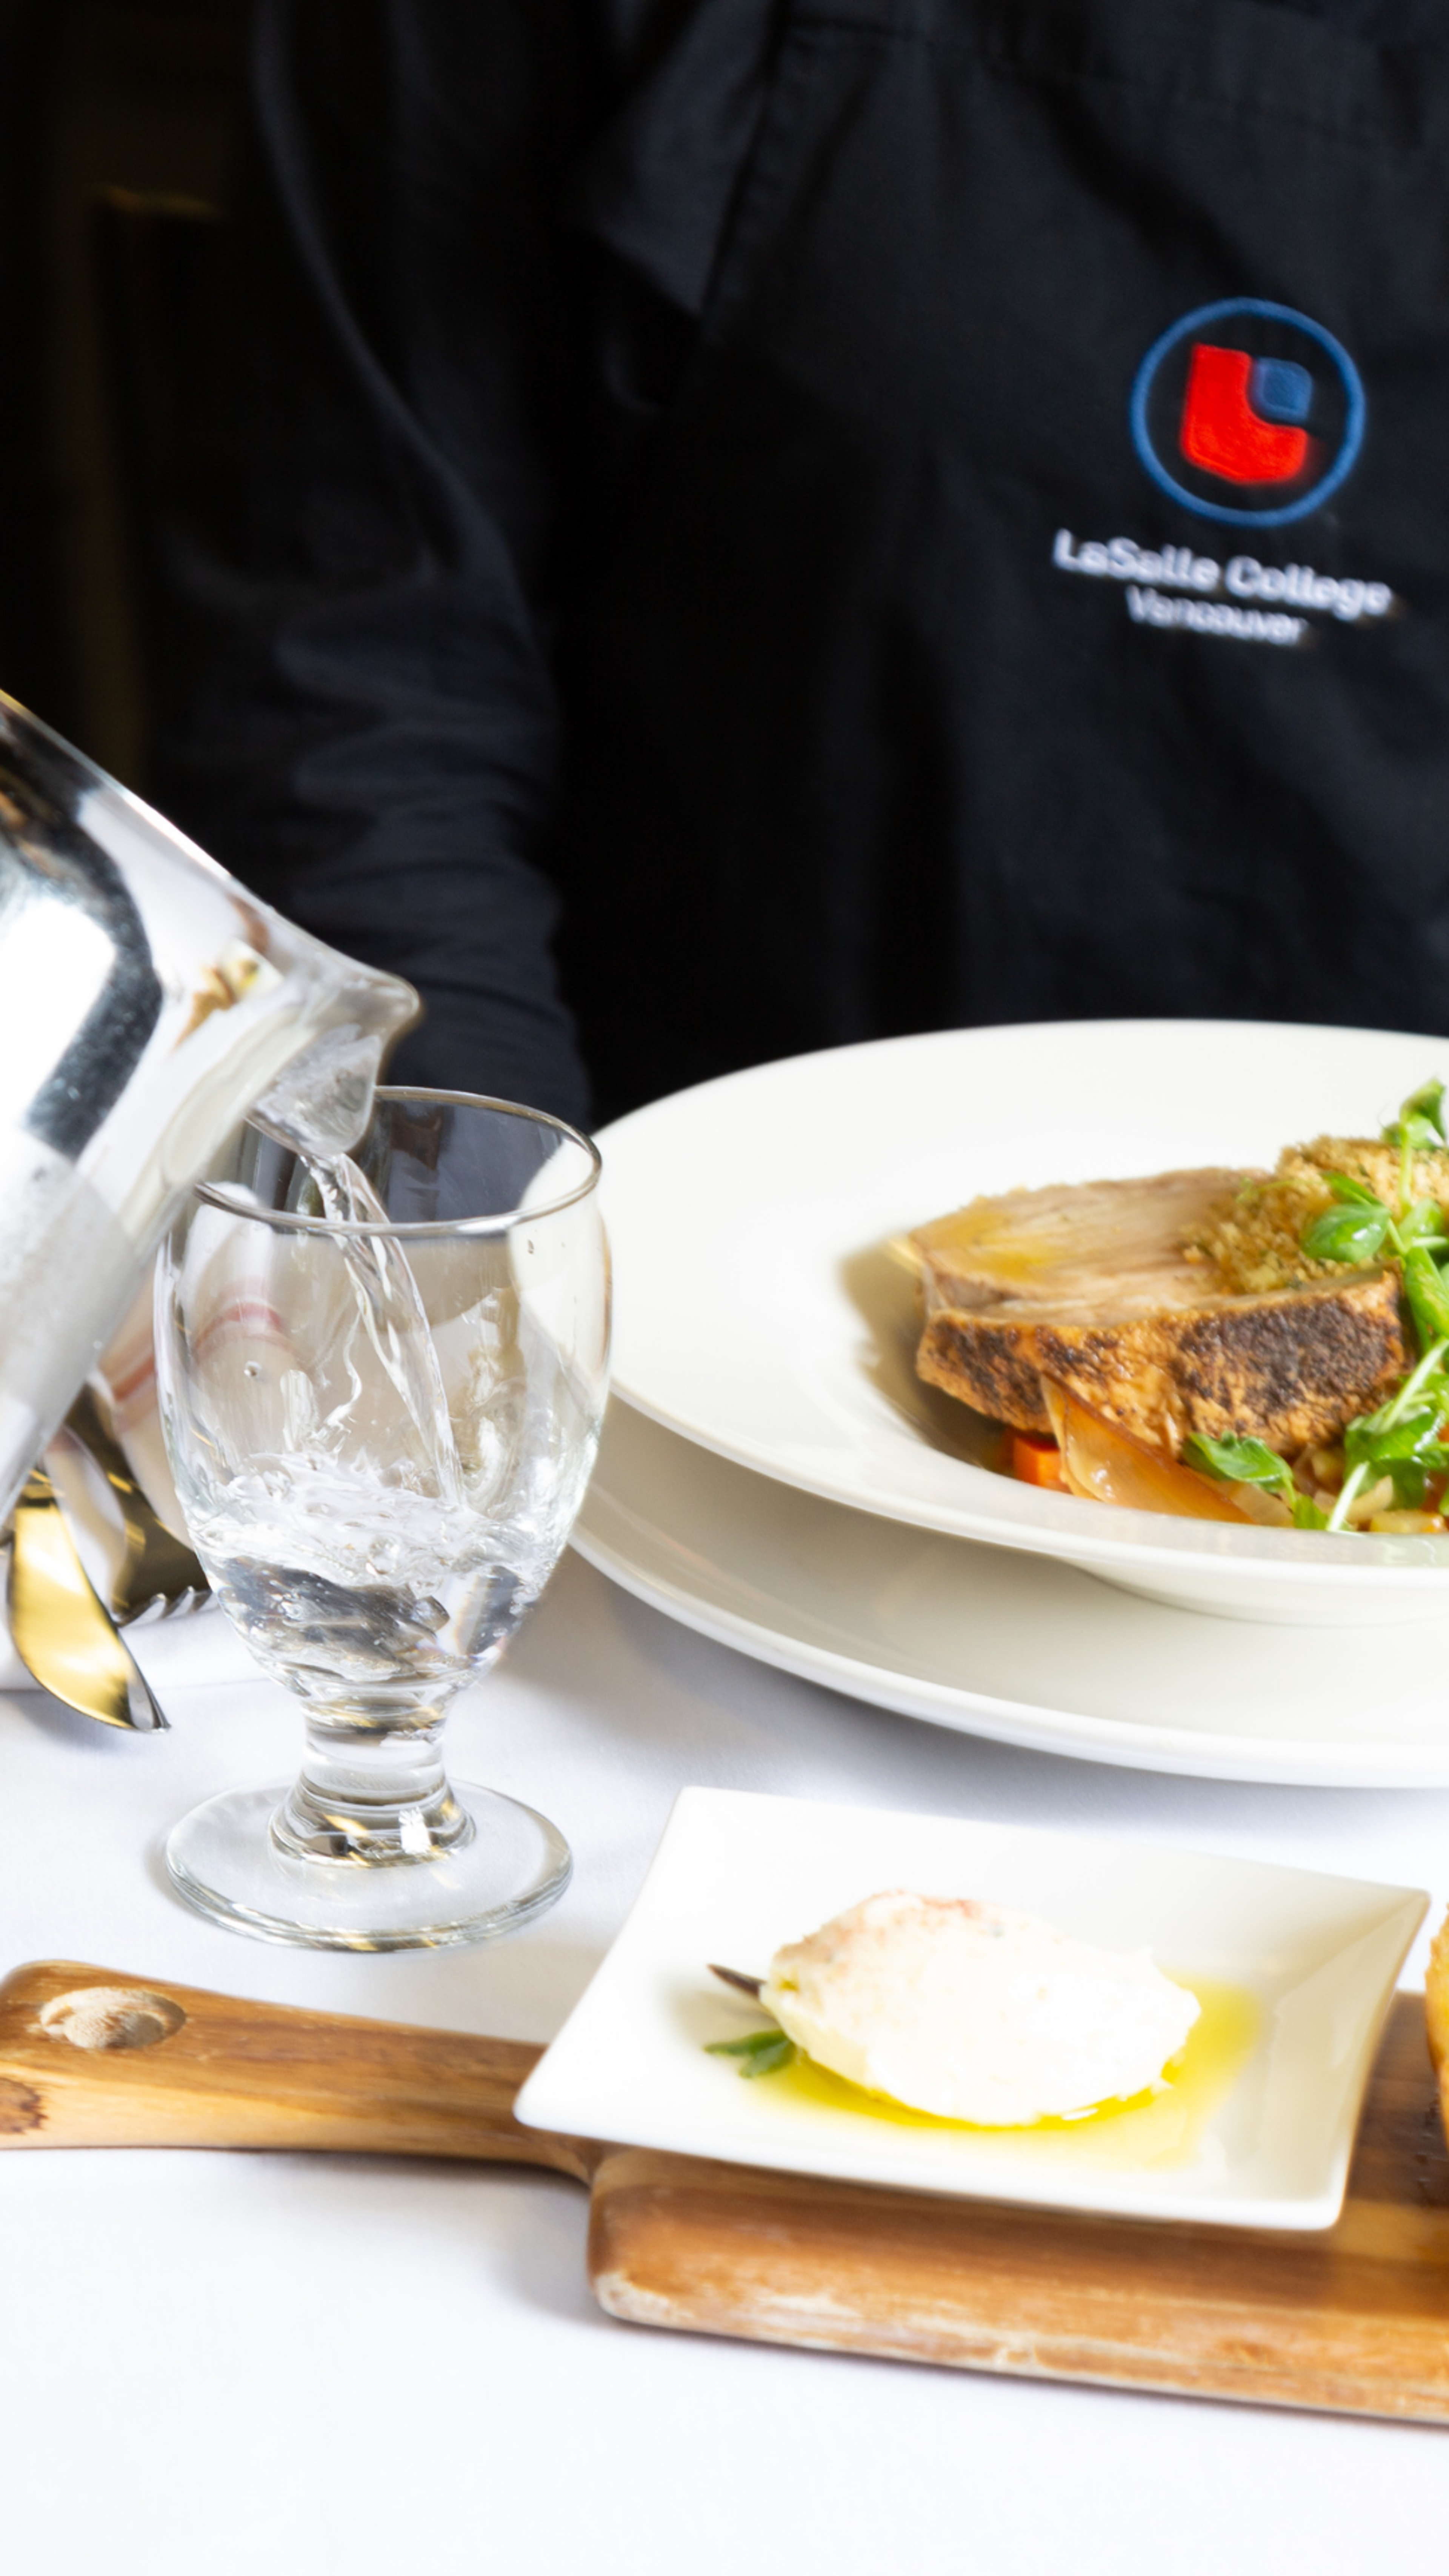 A server in a black apron, emblazoned with "LaSalle College Vancouver," pours water into a glass at a fine dining table featuring a dish of pan-seared fish and a side of creamy spread.